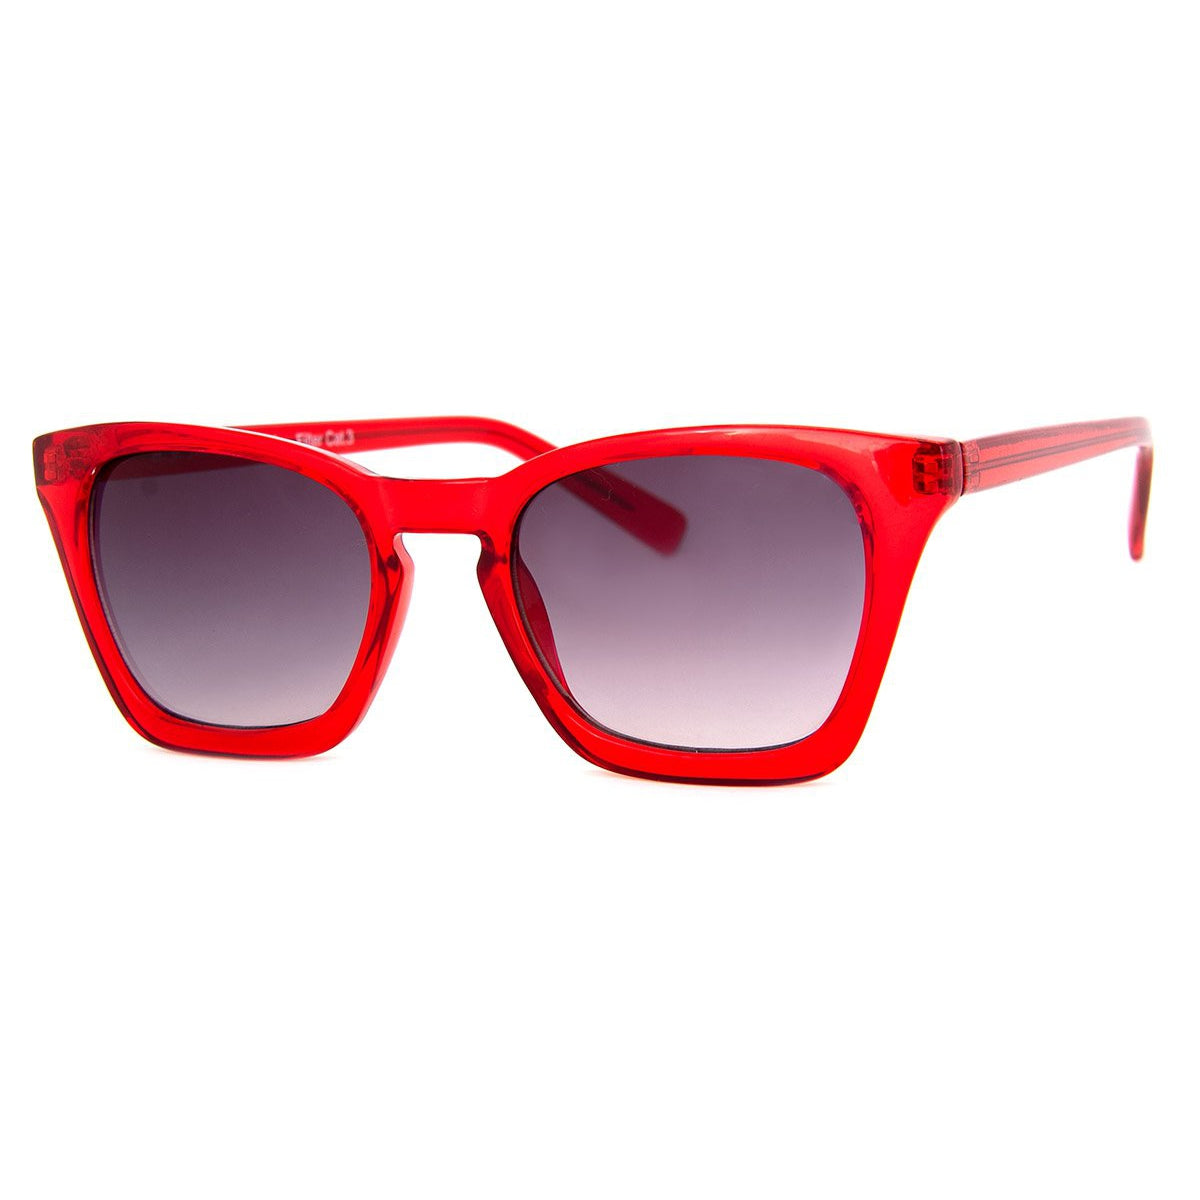 Thelma Sunglass Readers - Red